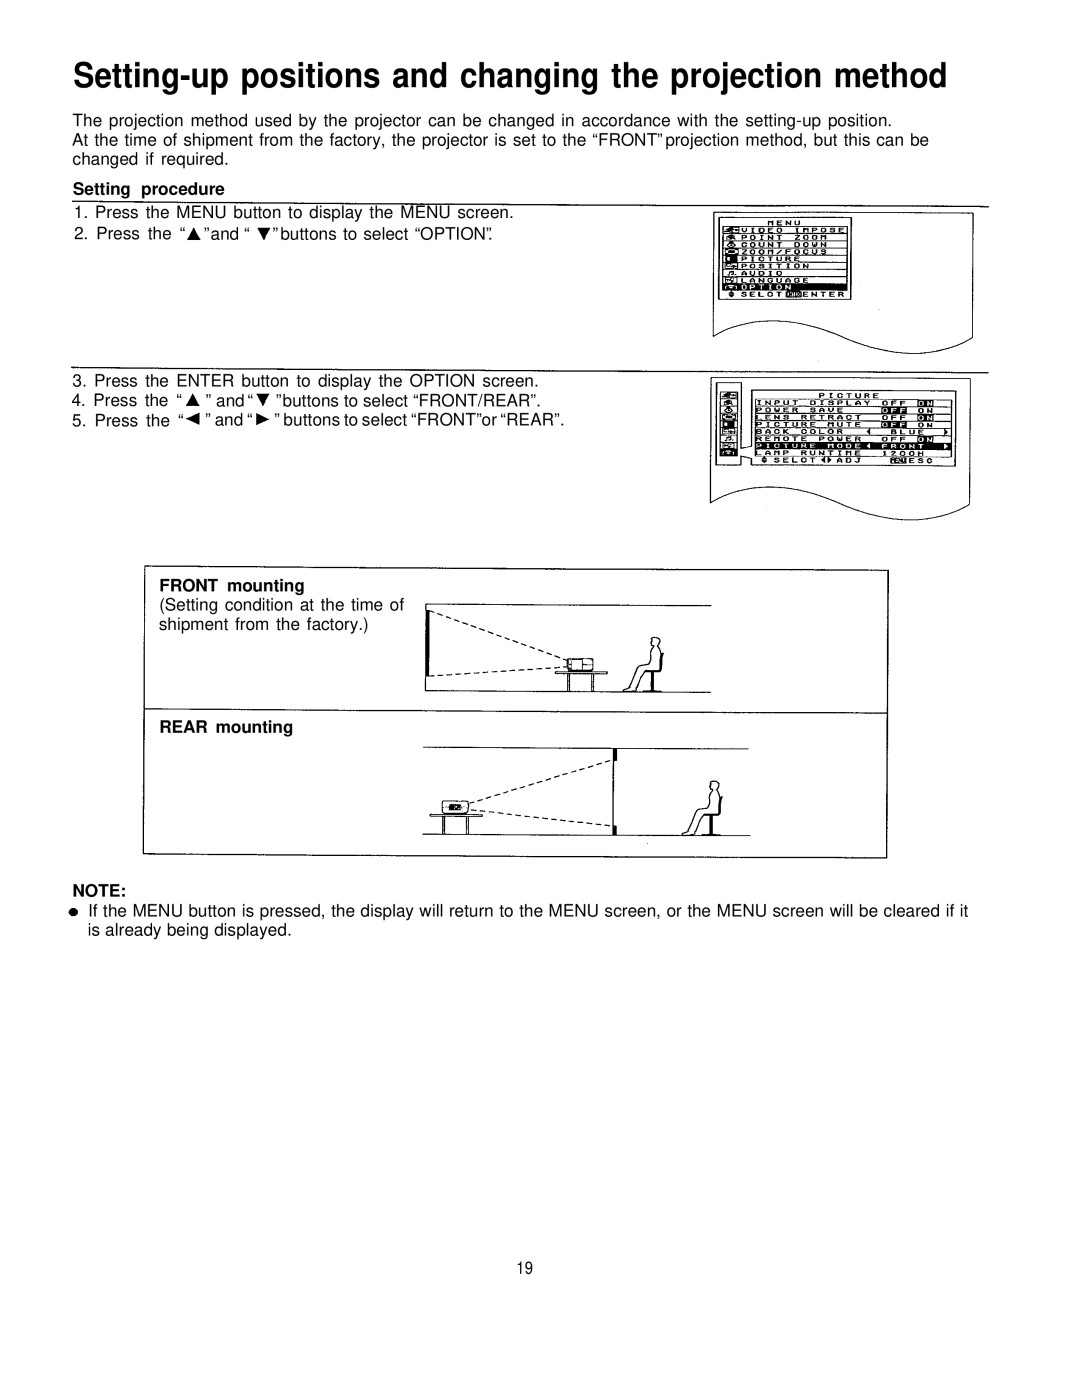 Panasonic PT-L795U manual Setting-up positions and changing the projection method, Setting procedure, FRONT mounting 